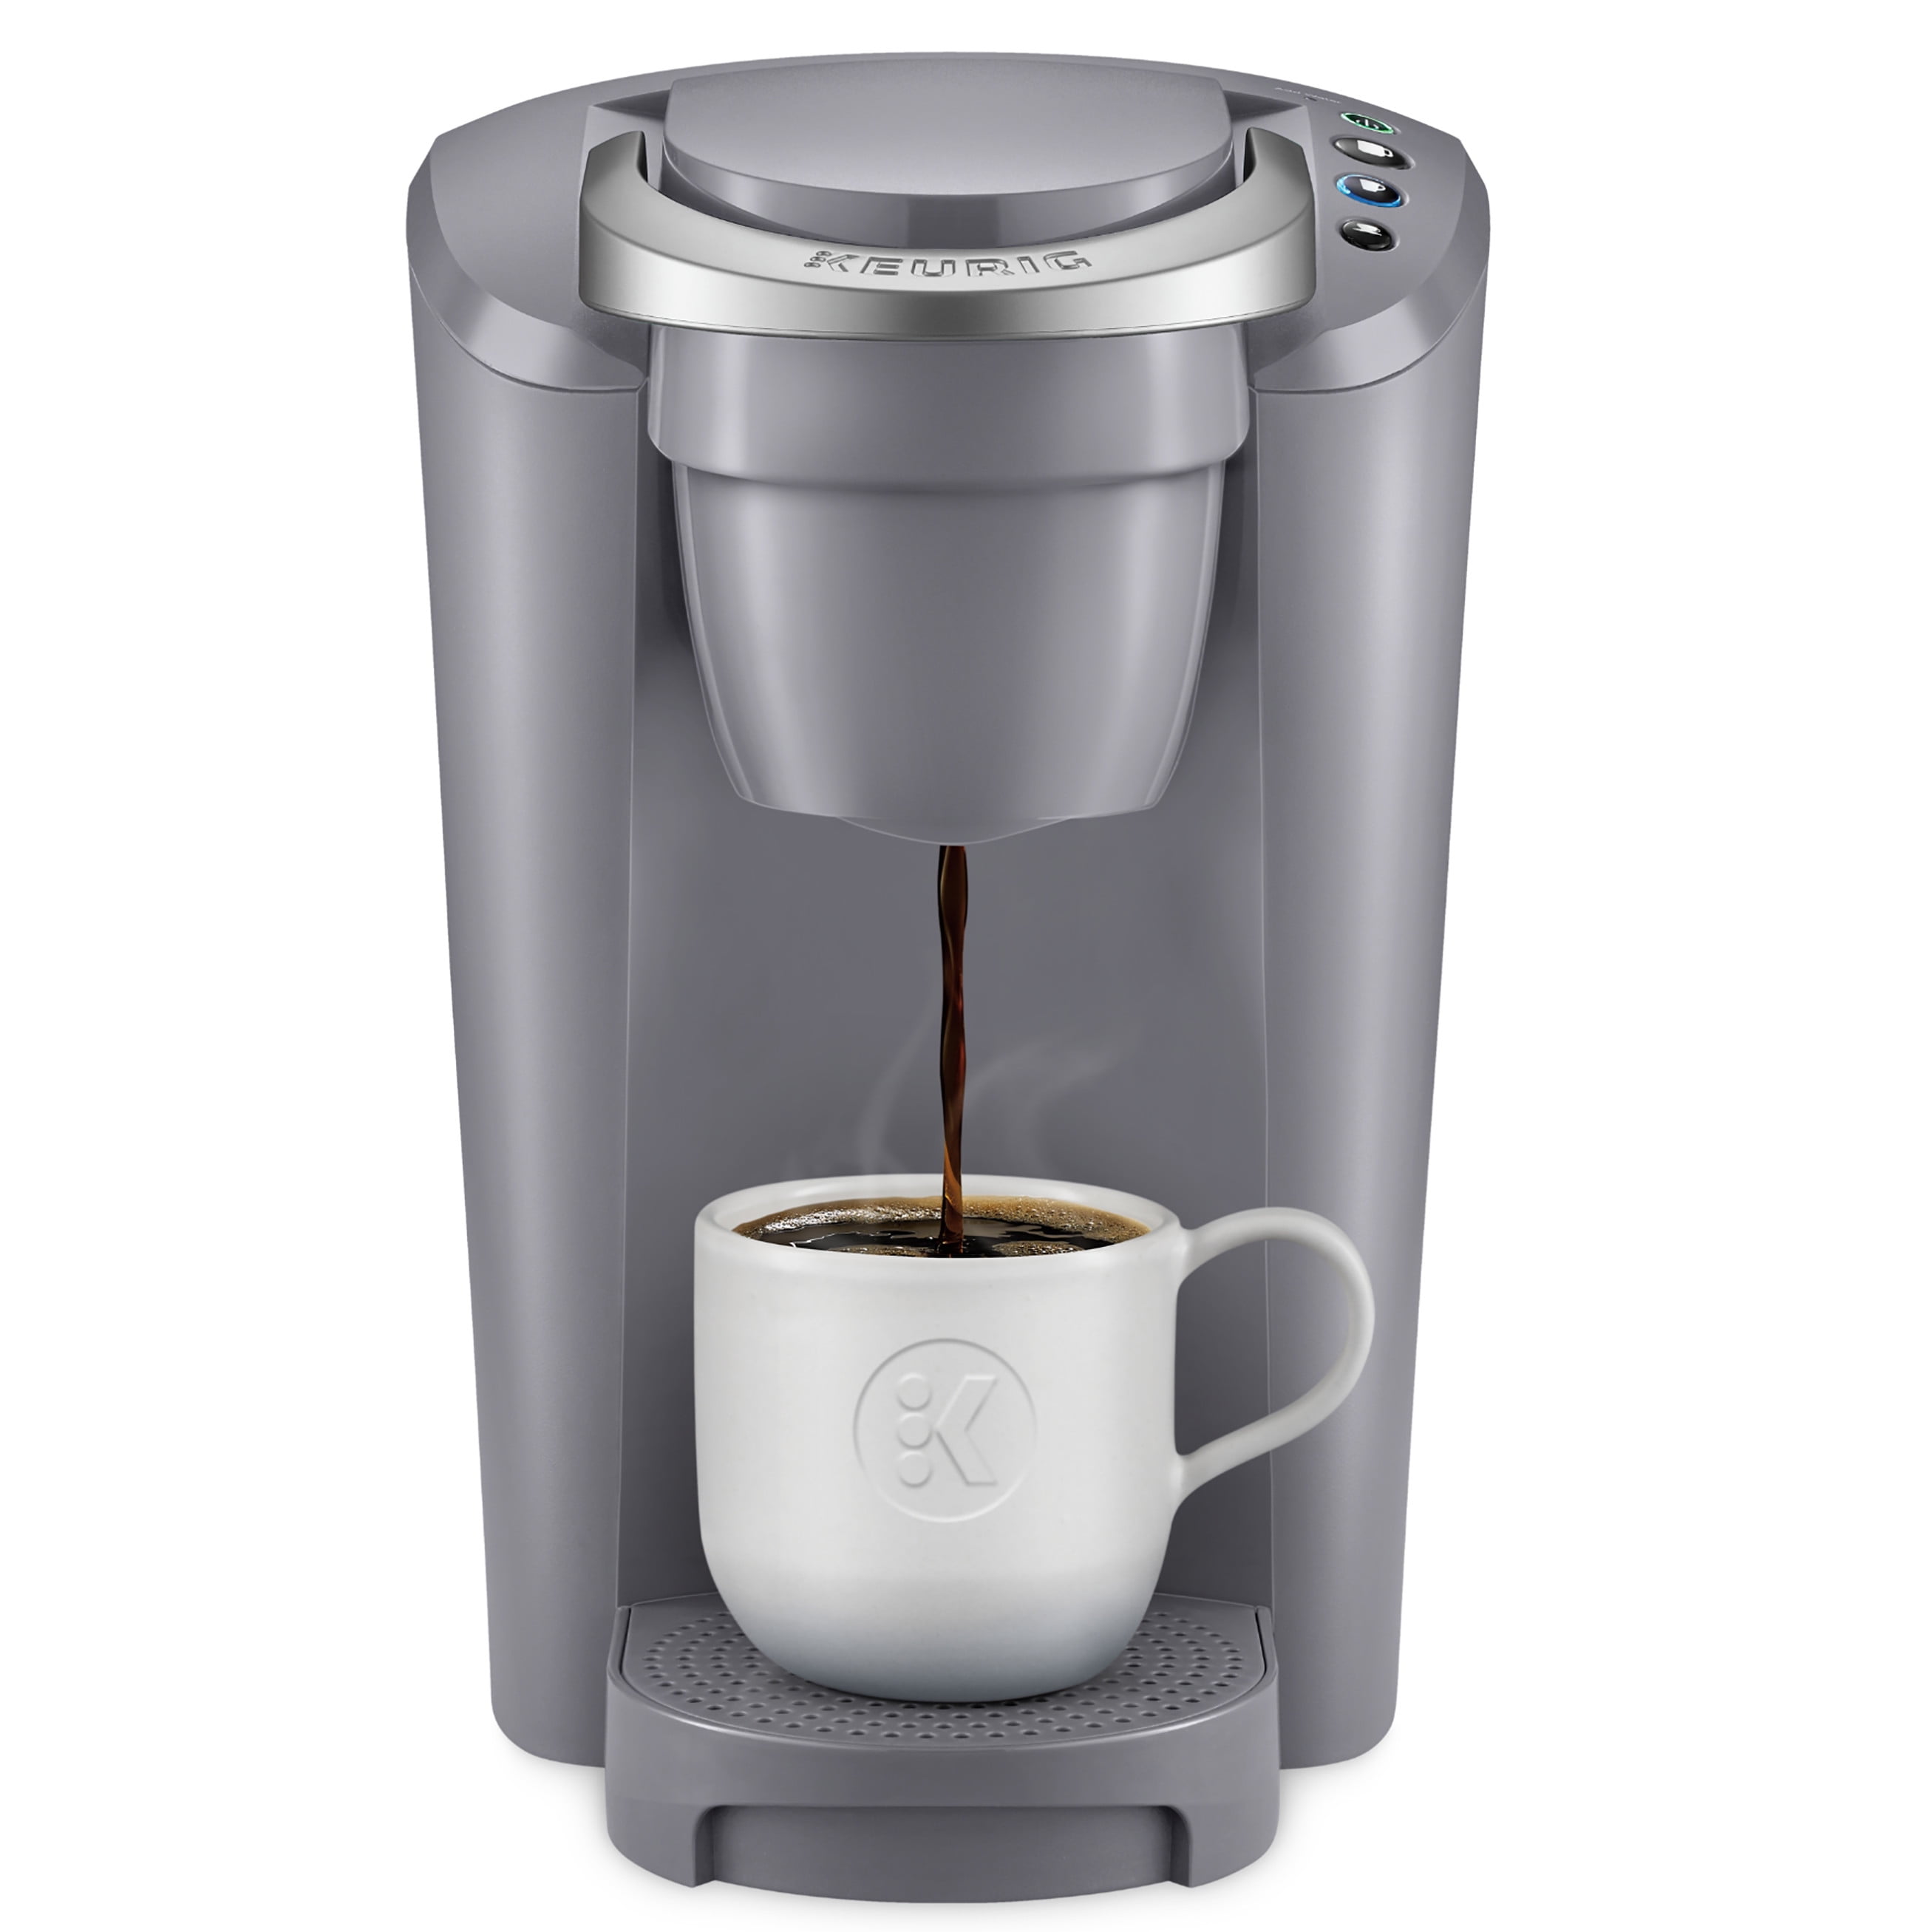 Keurig® 12oz Stainless Steel Insulated Coffee Travel Mug, Fits Under Any  Keurig® K-Cup Pod Coffee Maker (including K-15/K-Mini), Silver